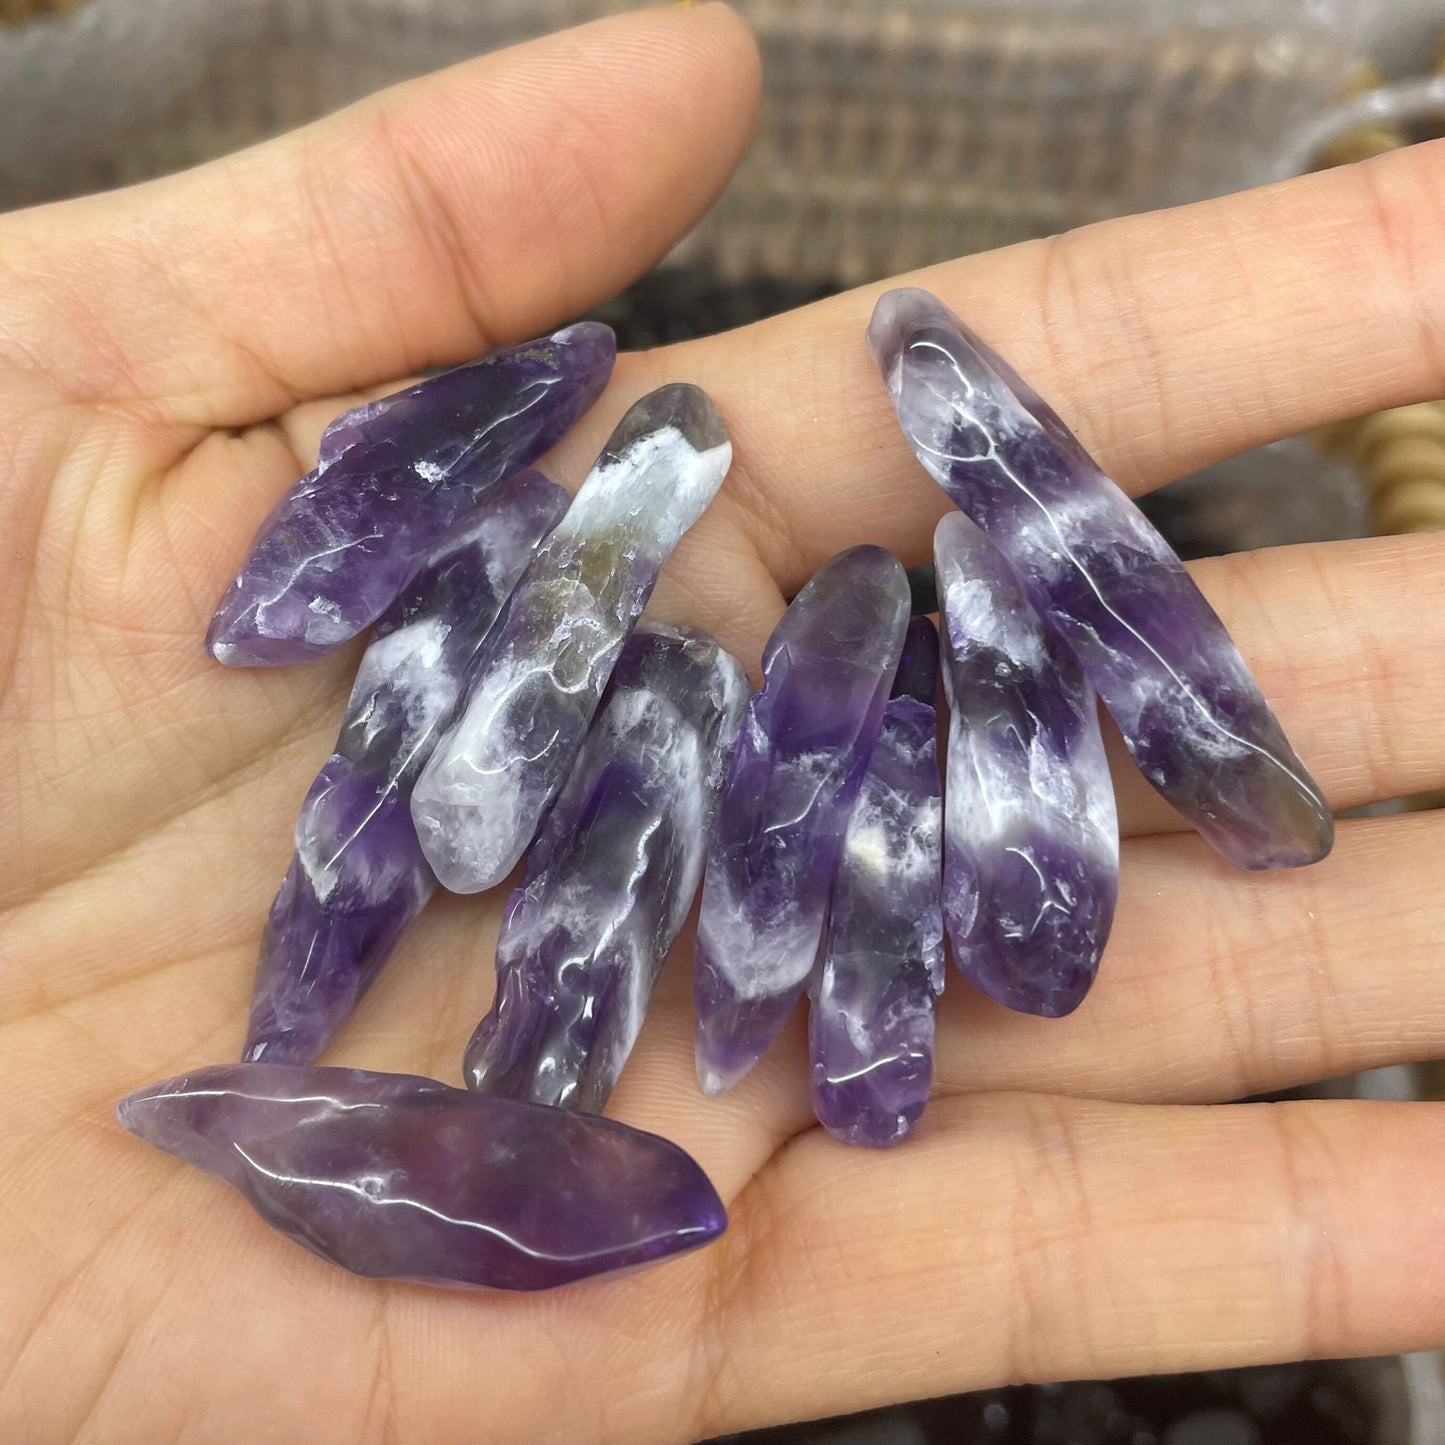 Natural Amethyst Quartz Crystal Cluster - Healing Stone and Home Decor Collectible